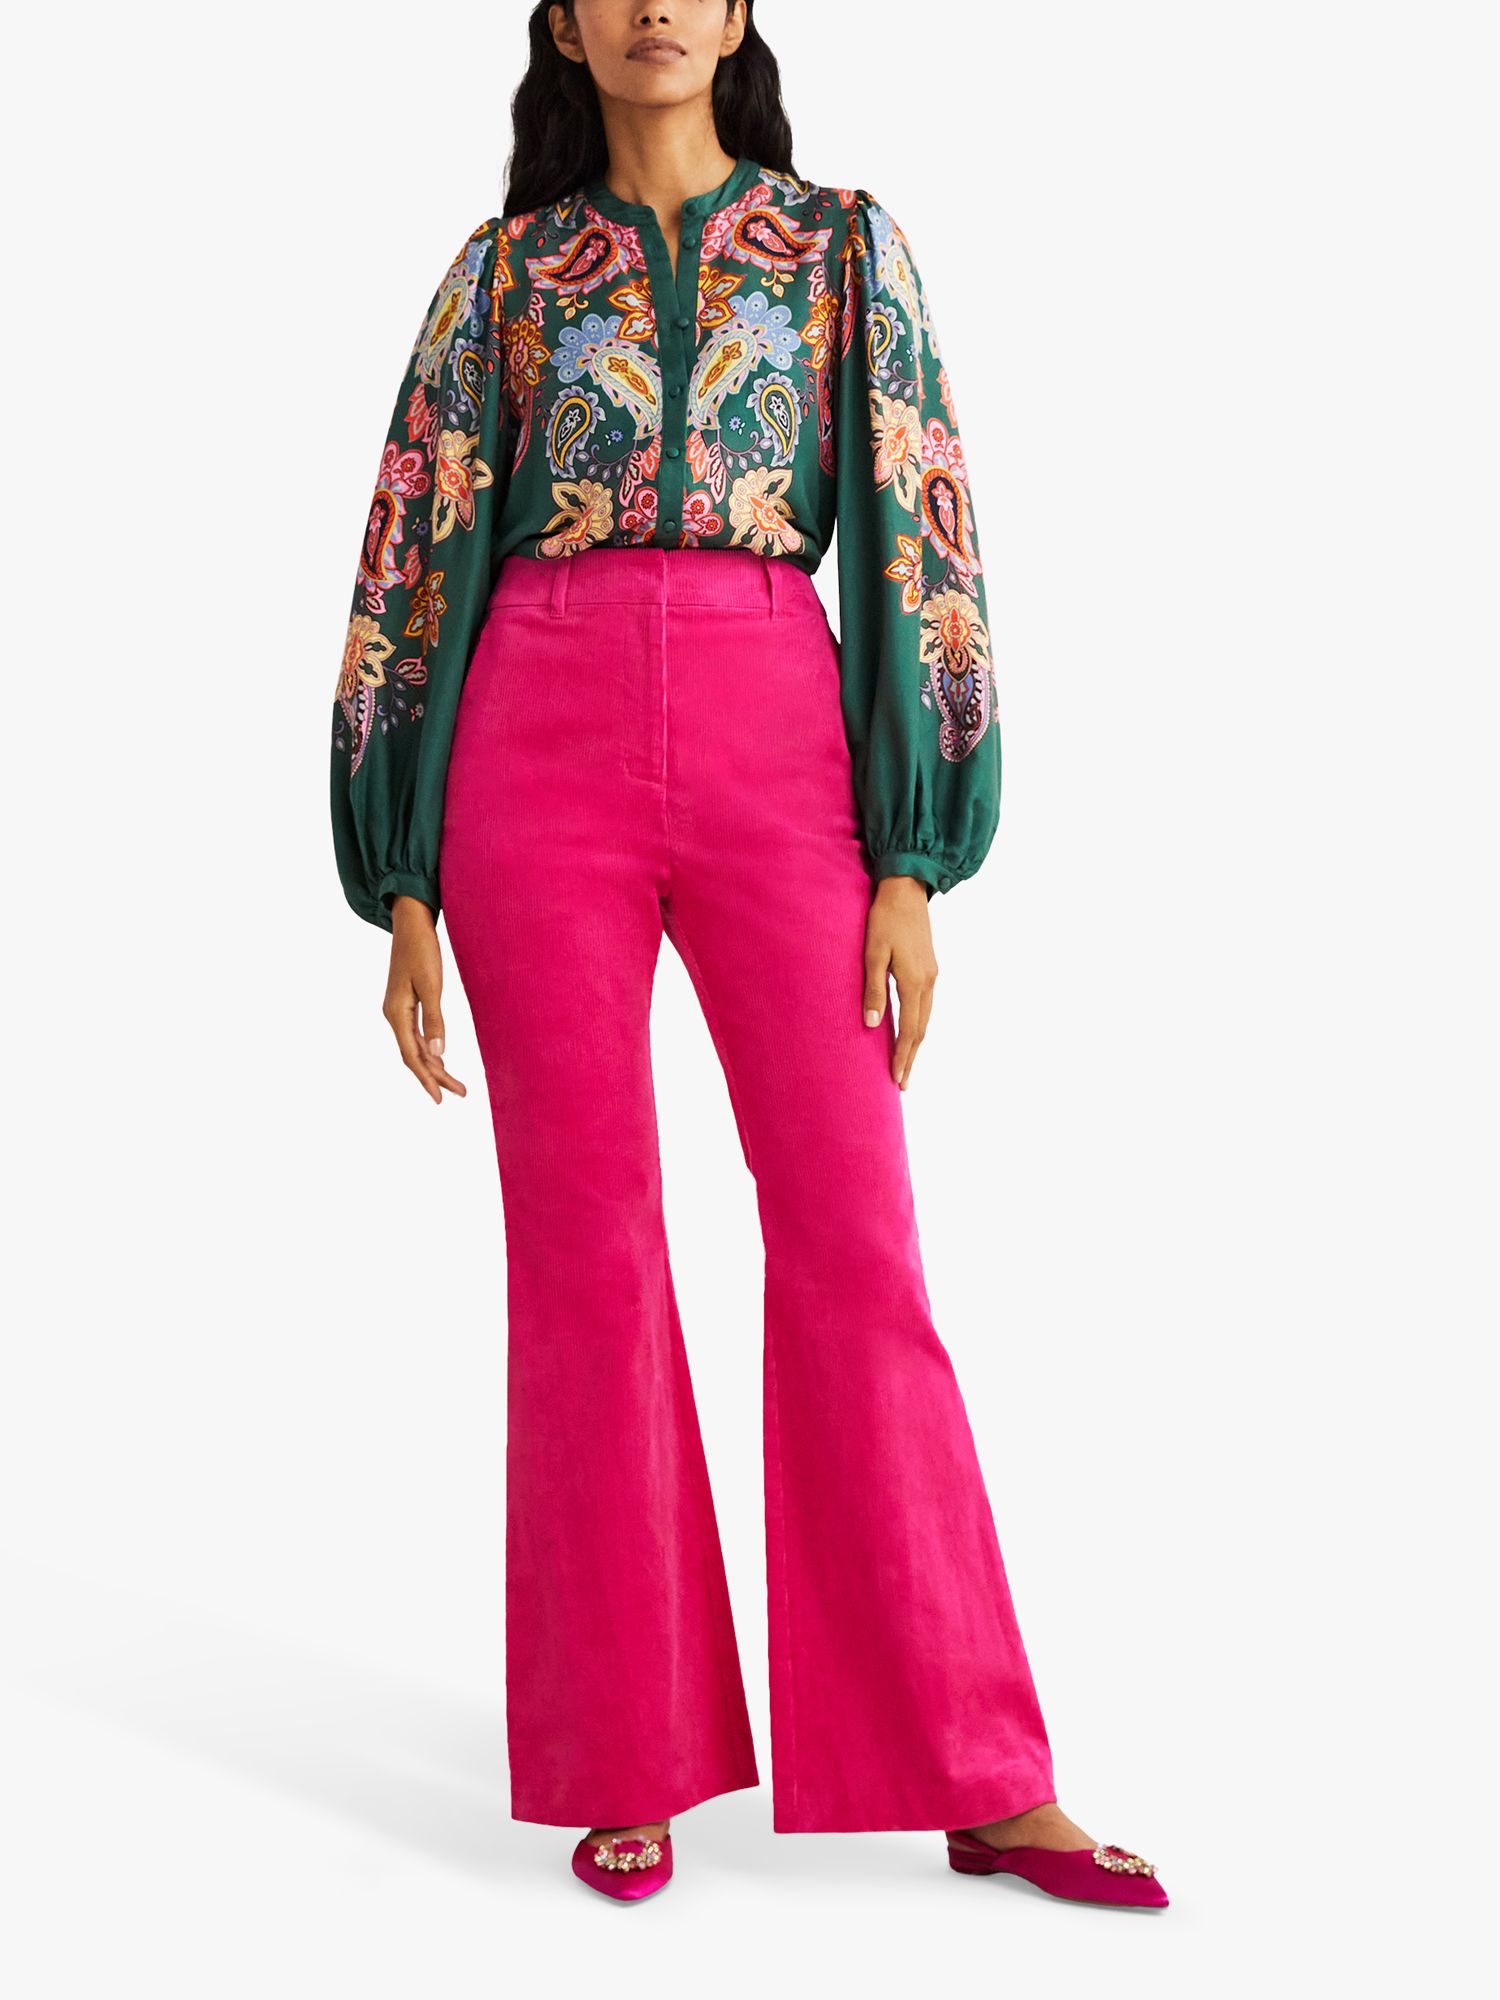 Boden Fitted Flared Trousers, Wild Watermelon Pink, 8